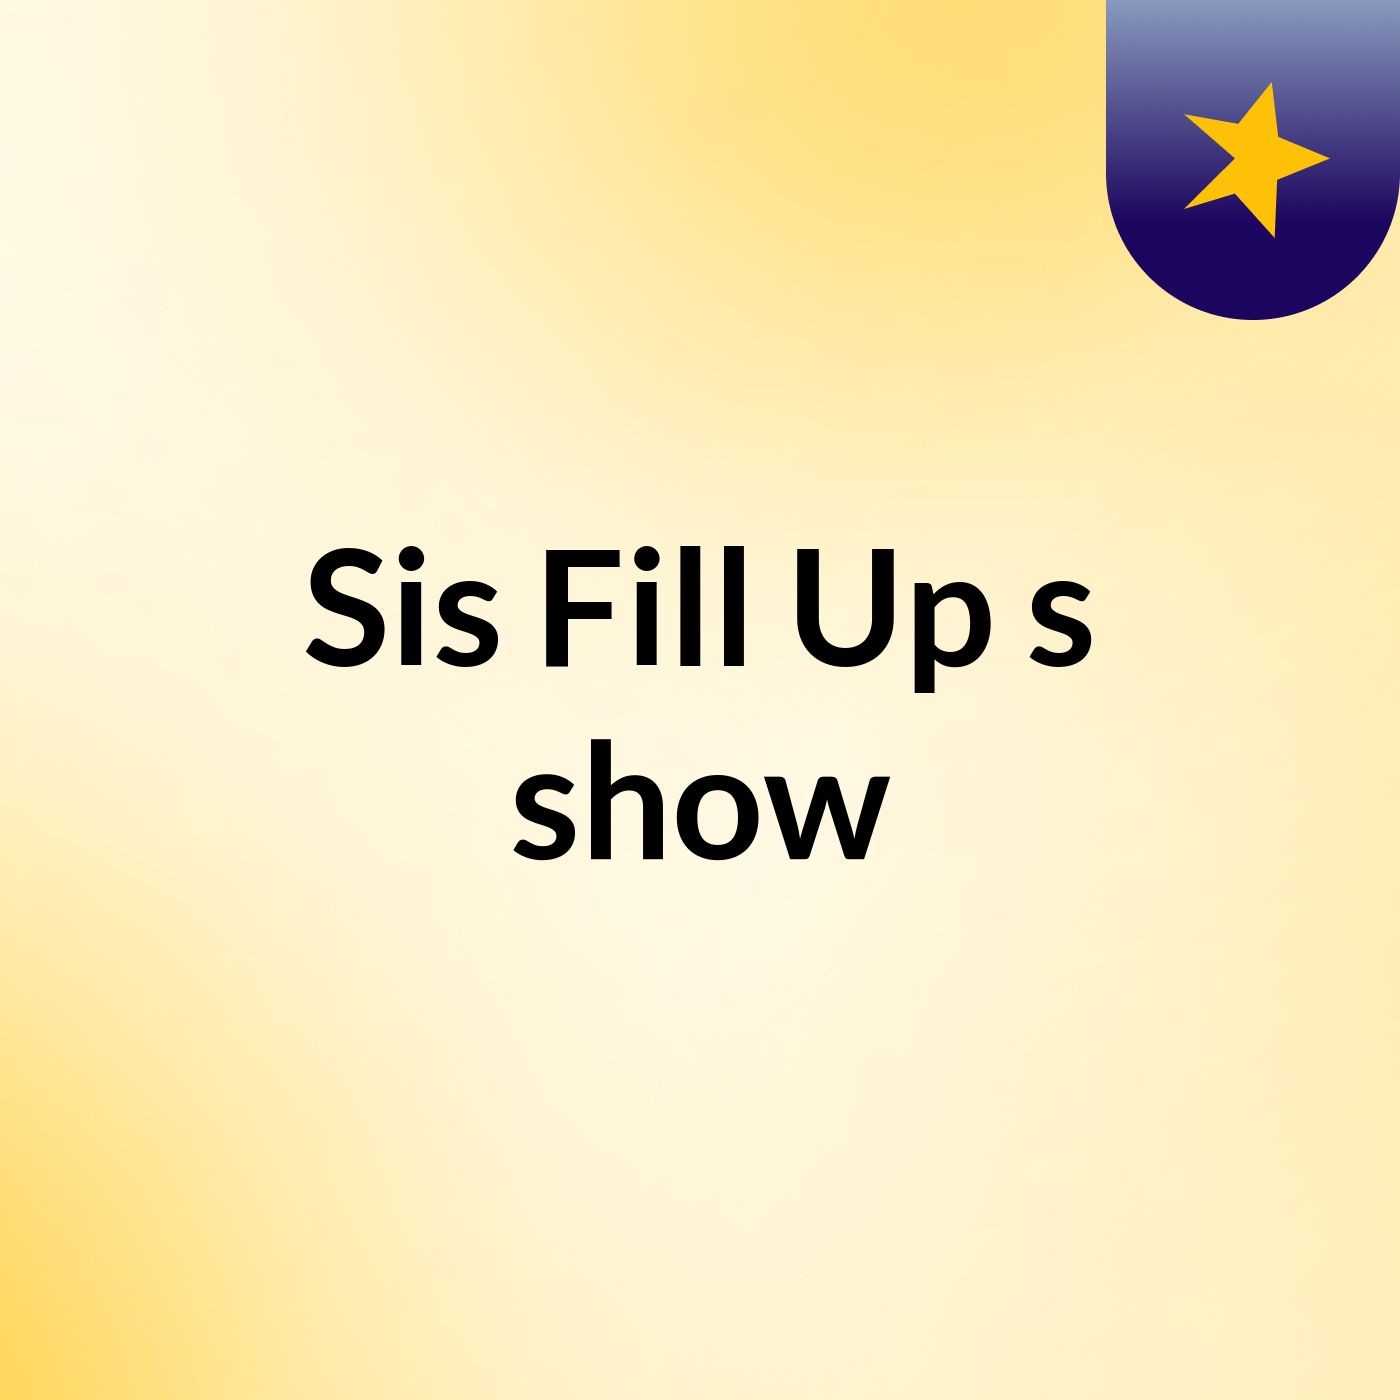 Sis' Fill Up's show